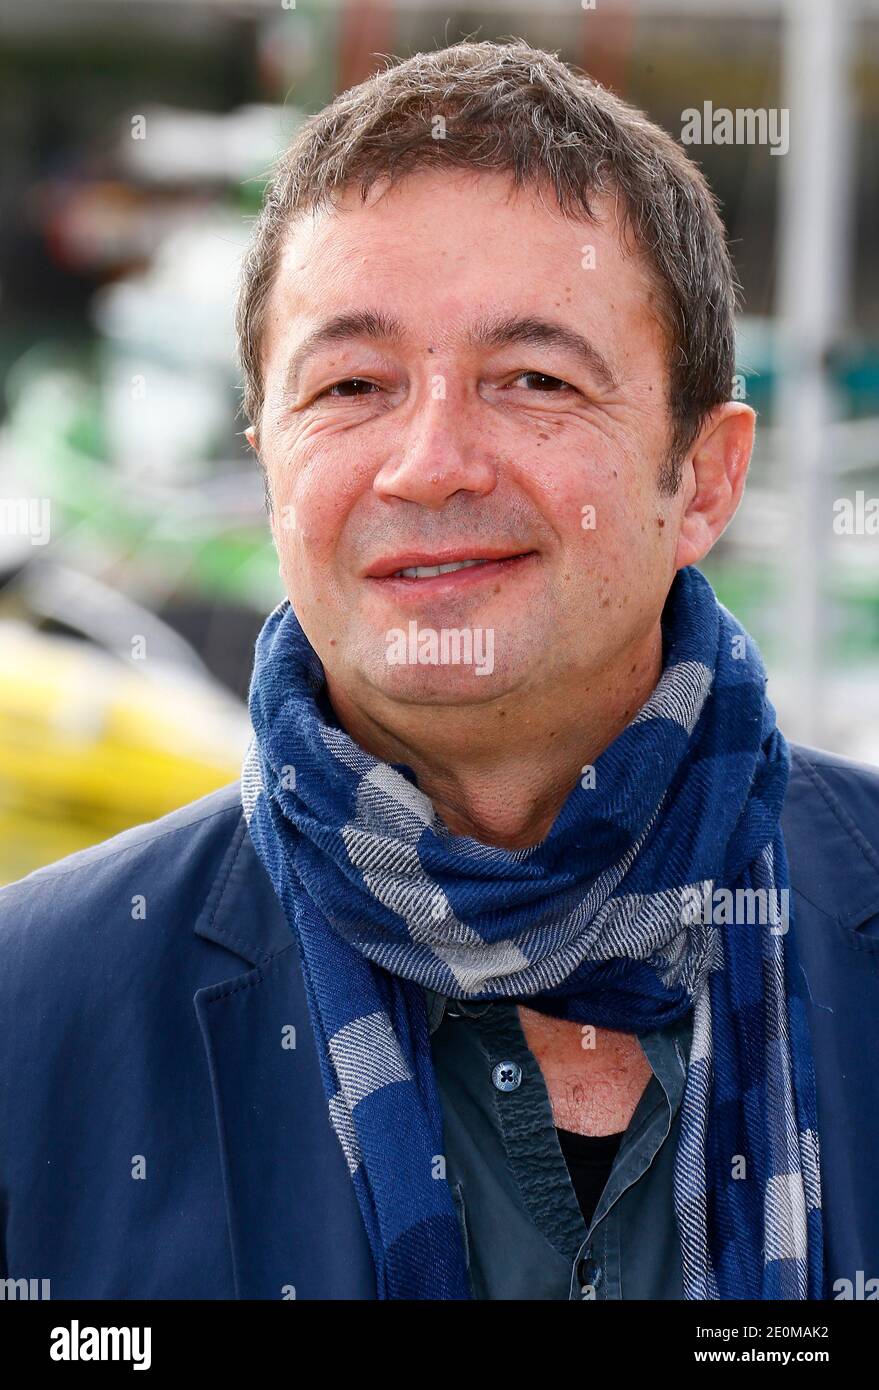 Frederic Bouraly for ' Scenes de menages' attending the 14th Festival of TV Fiction in La Rochelle, France, on September 15, 2012. Photo by Patrick Bernard/ABACAPRESS.COM Stock Photo